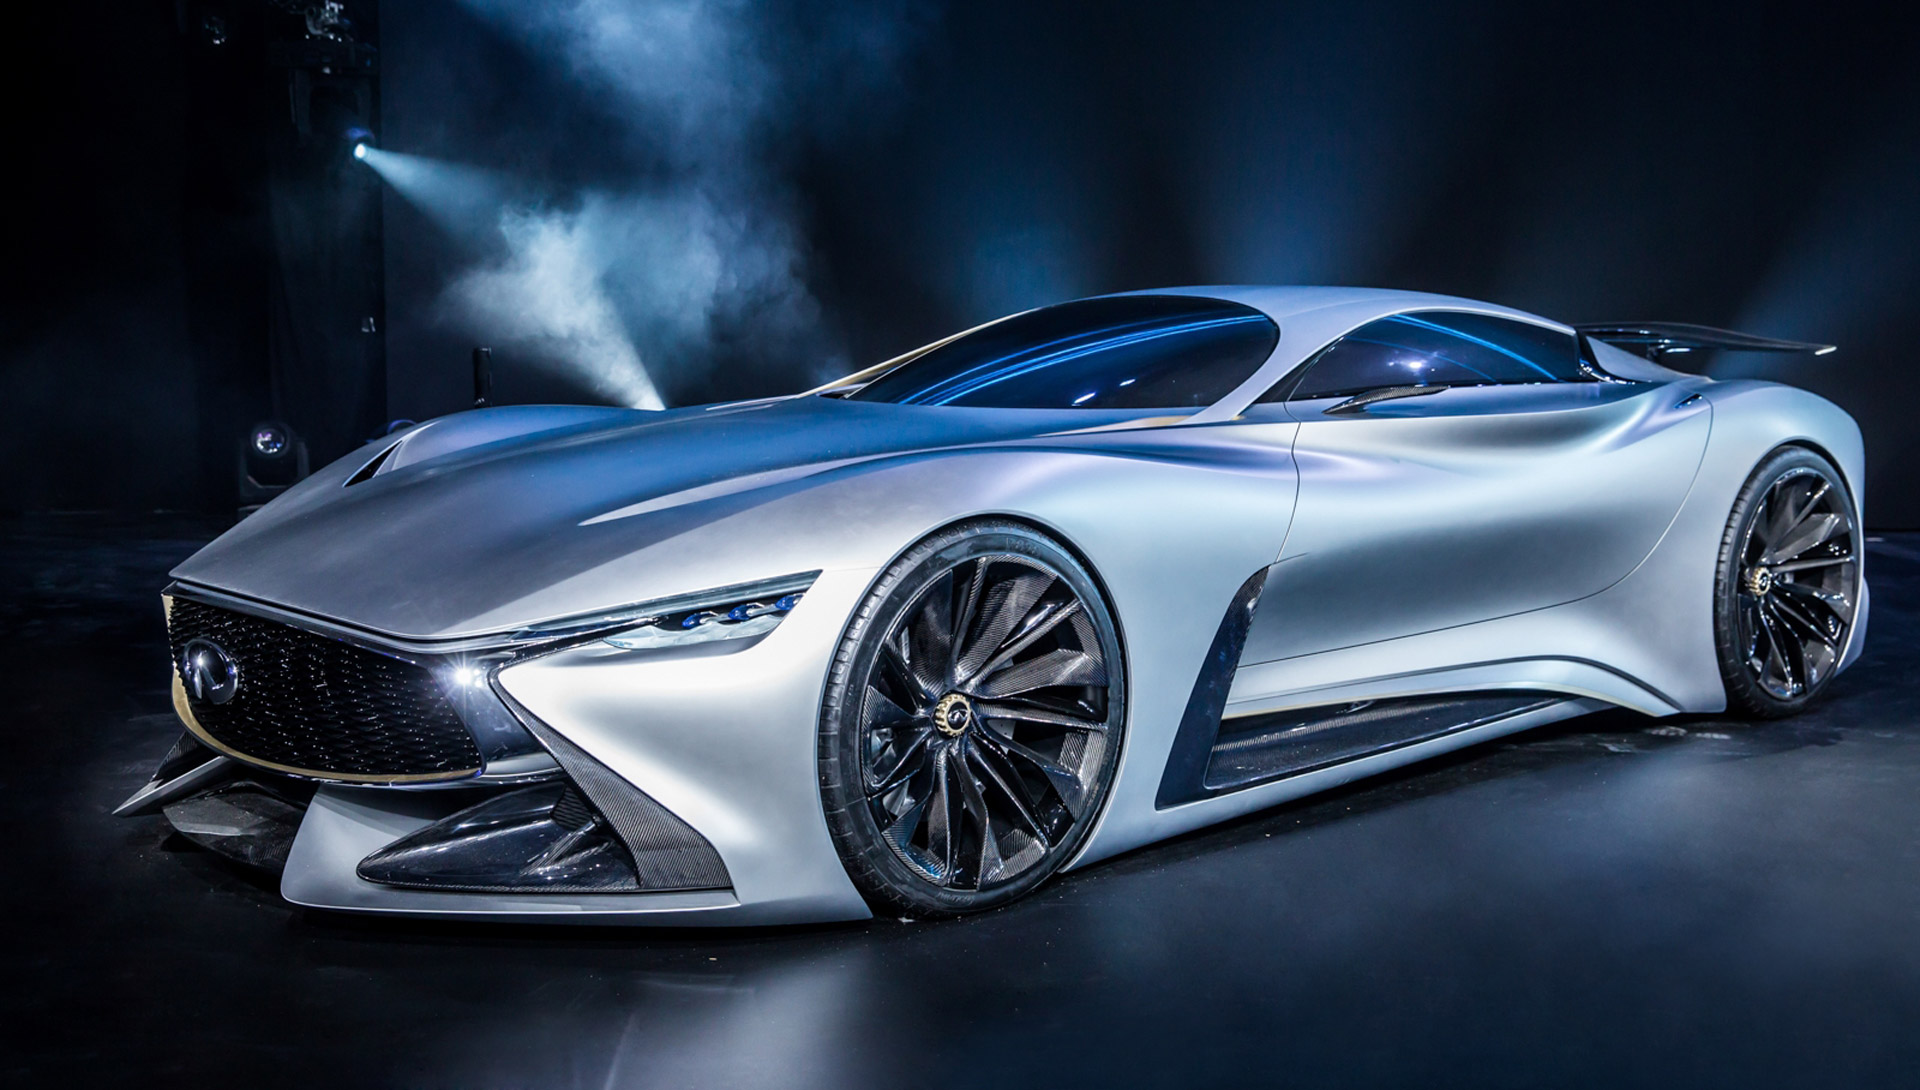 Infiniti Unveils Real-World Vision GT Supercar Concept